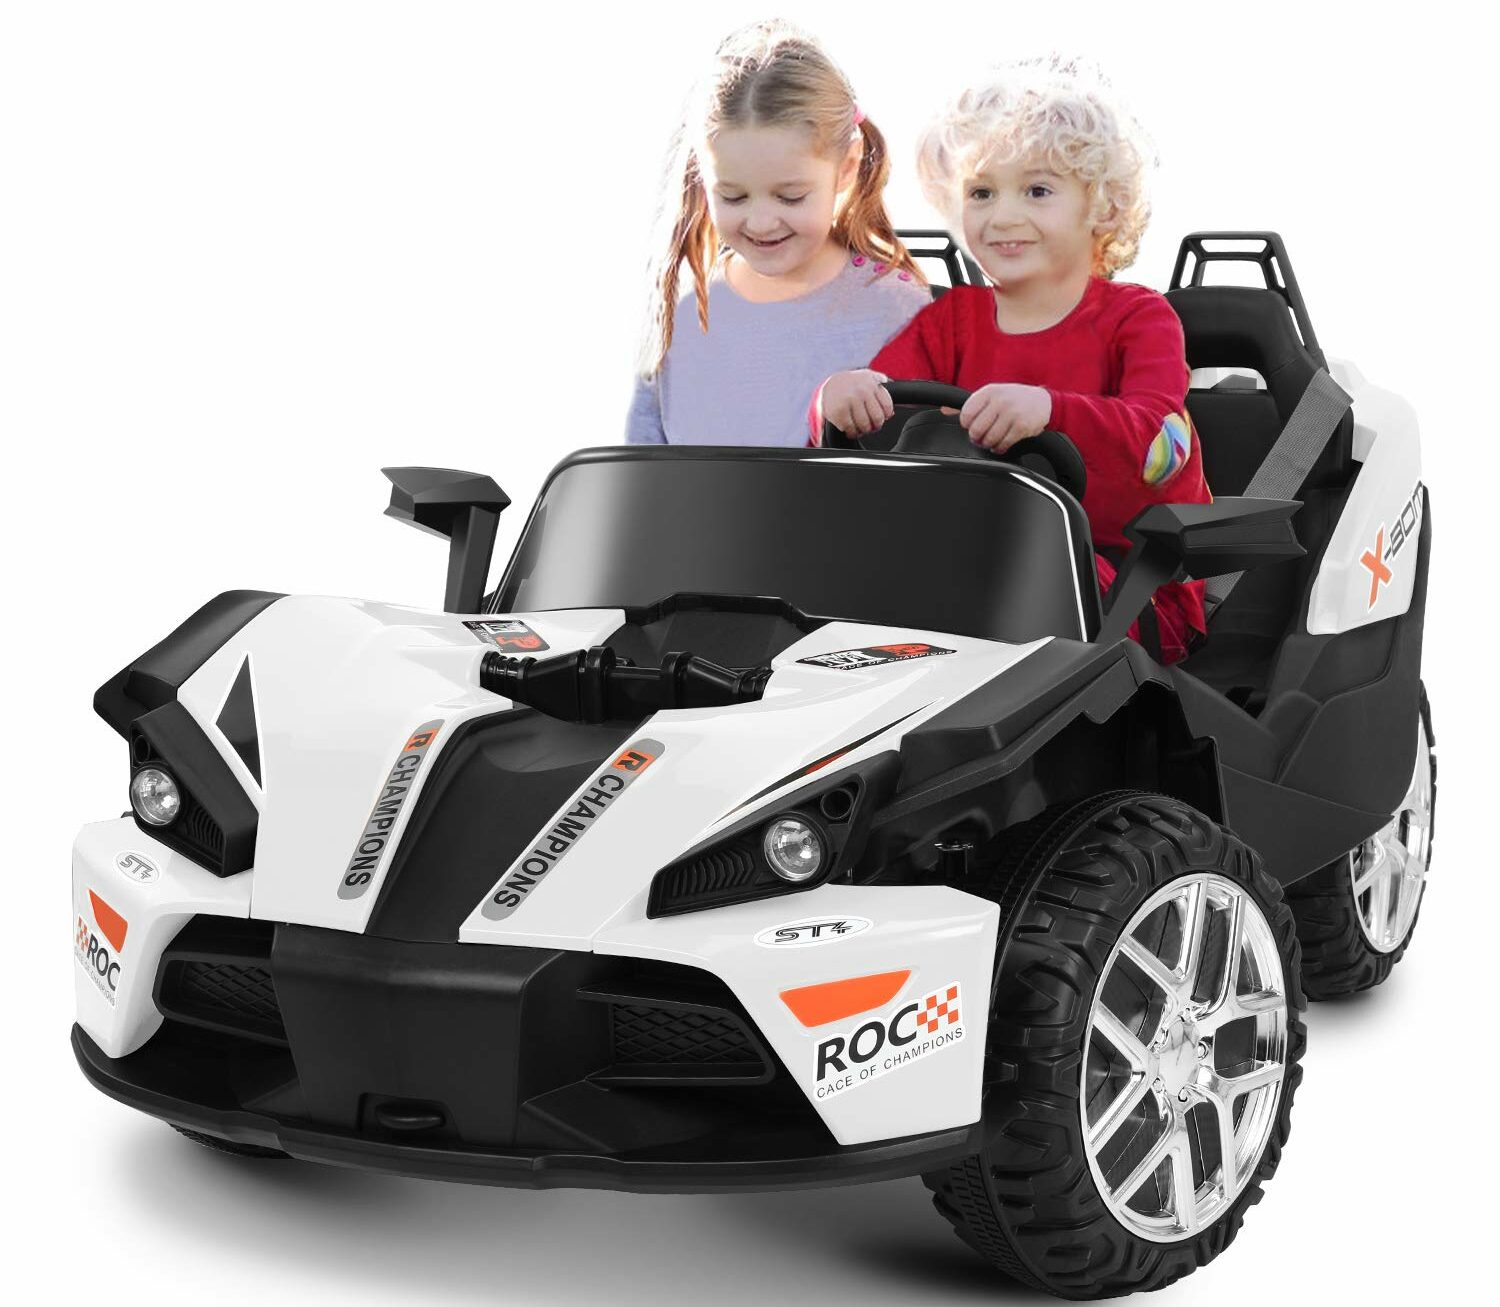 Bahom Kids Ride-on 2-seater Car